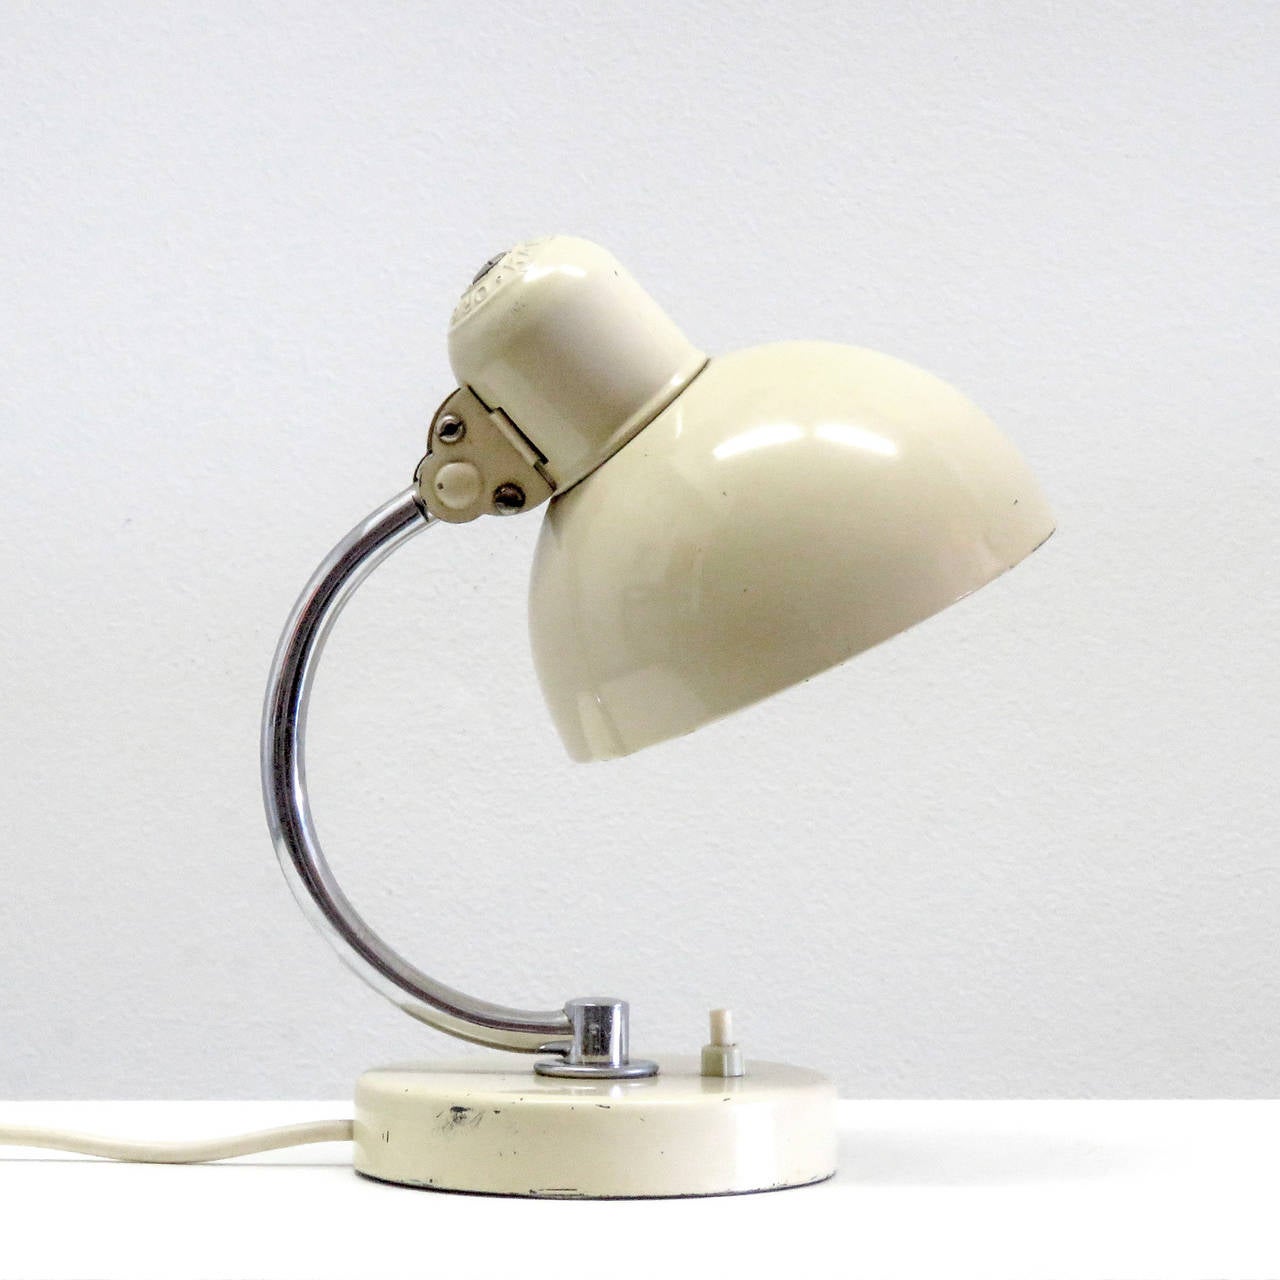 wonderful small bedside table lamp model 6722 or "Baby Kaiser", designed in 1933 by Christian Dell, marked